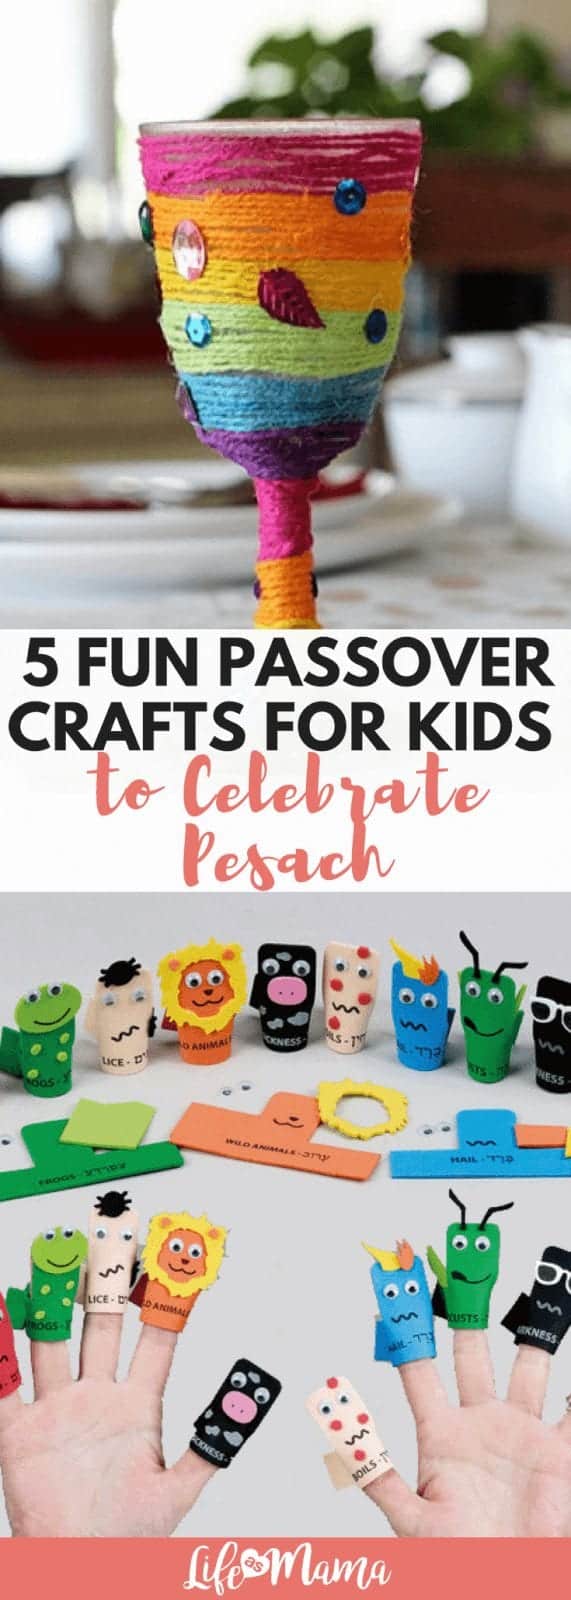 5 Fun Passover Crafts For Kids to Celebrate Pesach